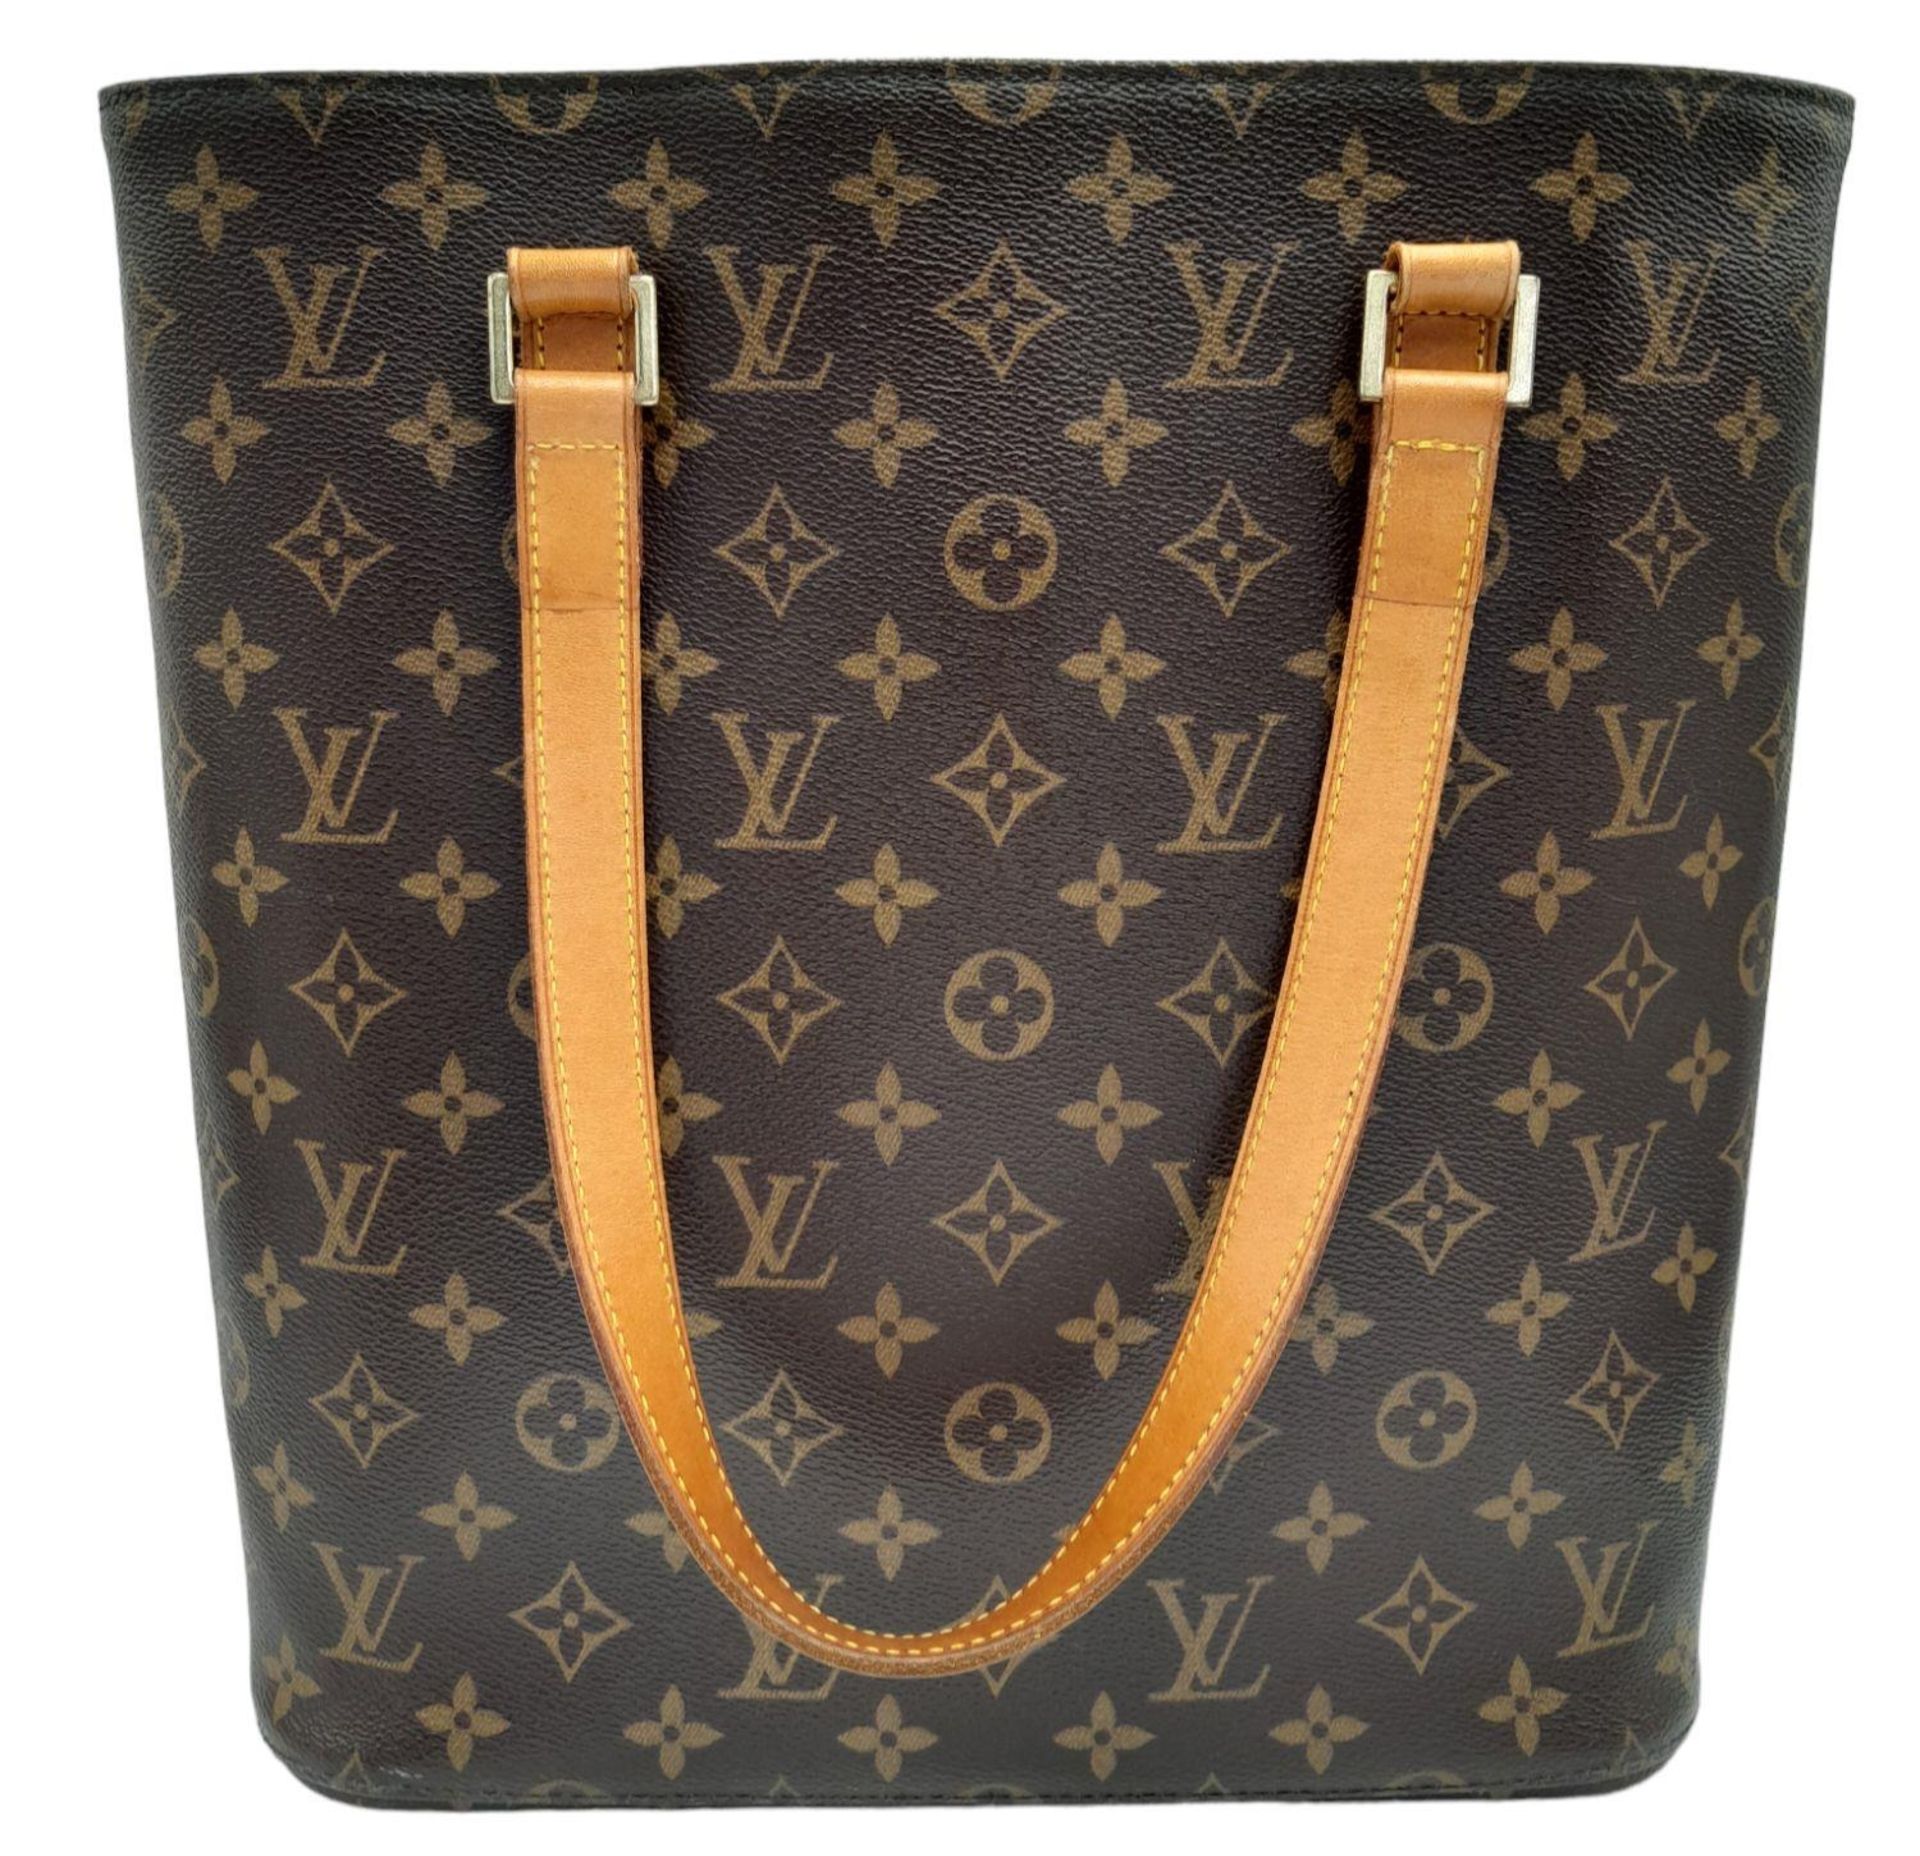 A Louis Vuitton Vavin GM Tote Bag. Monogramed canvas exterior with gold-toned hardware and two